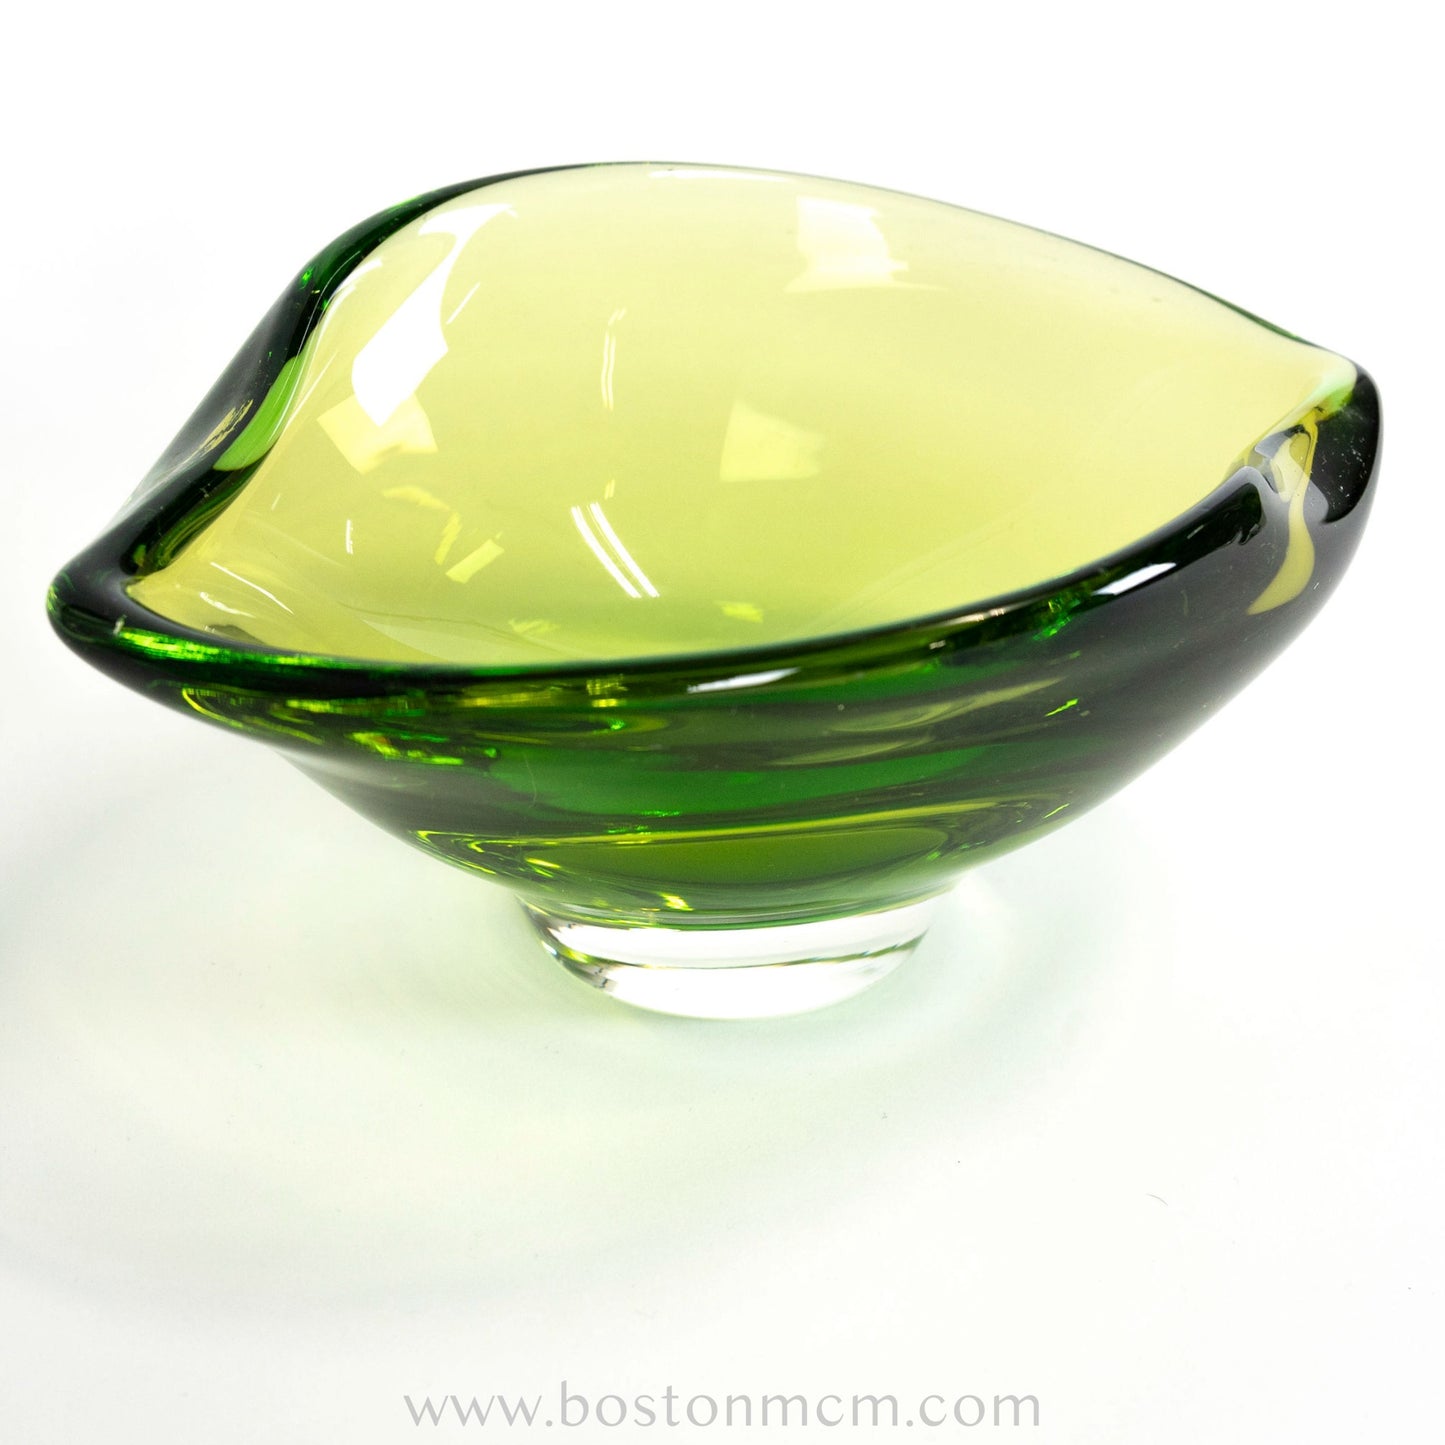 Italian Murano Art Glass Green Bowl, Possibly Sommerso